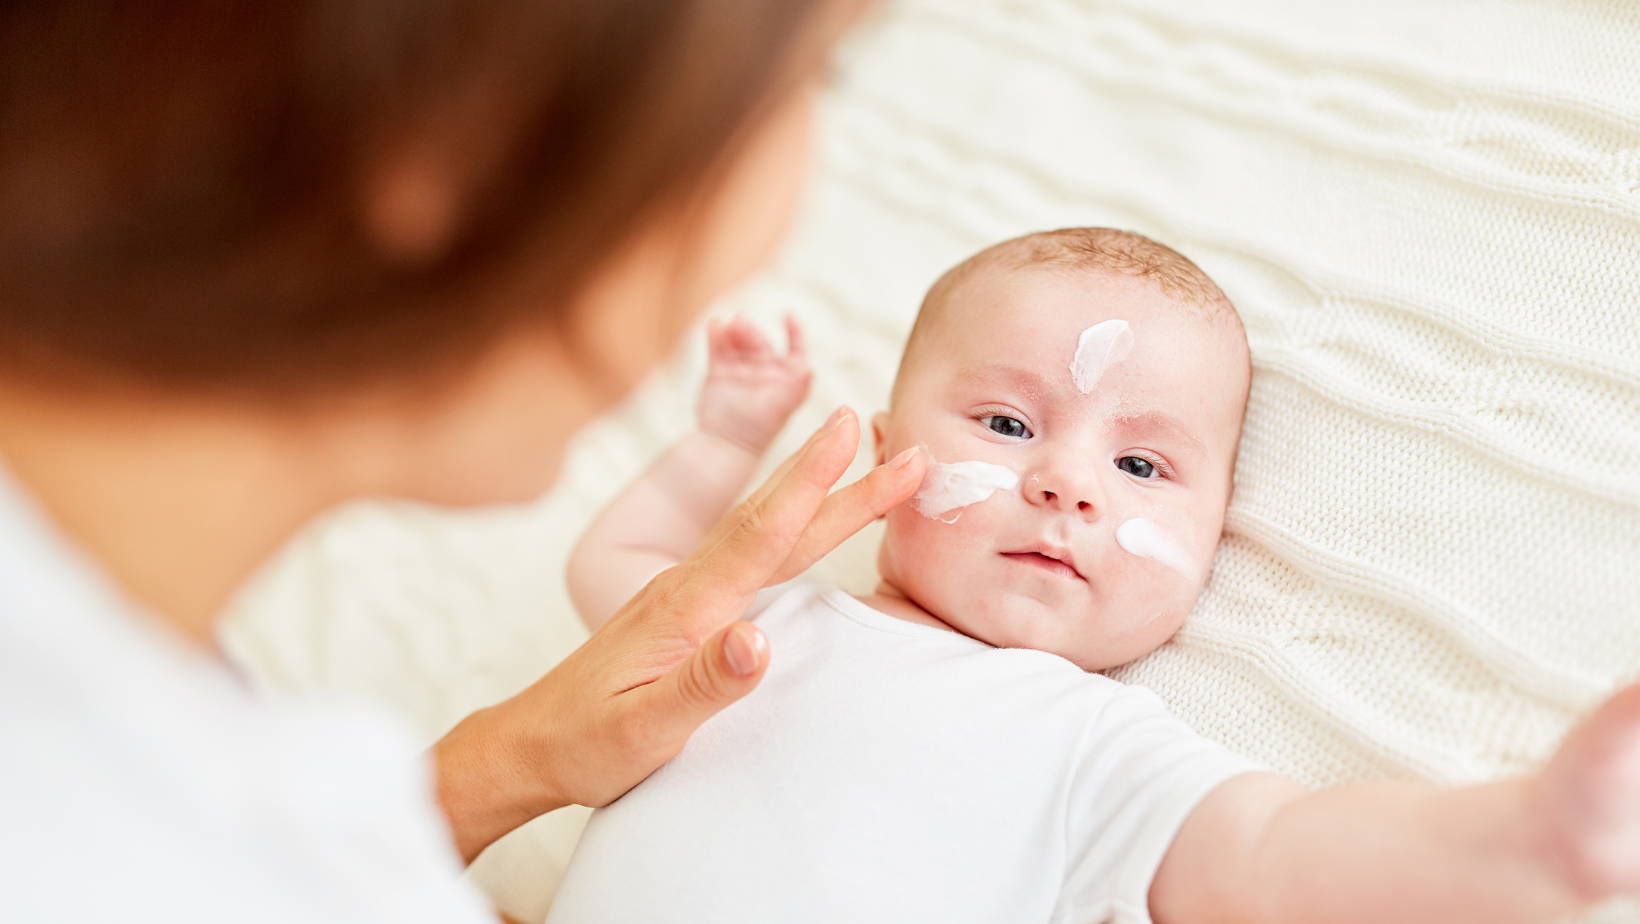 Mom putting Lotion on babys face | My Organic Company